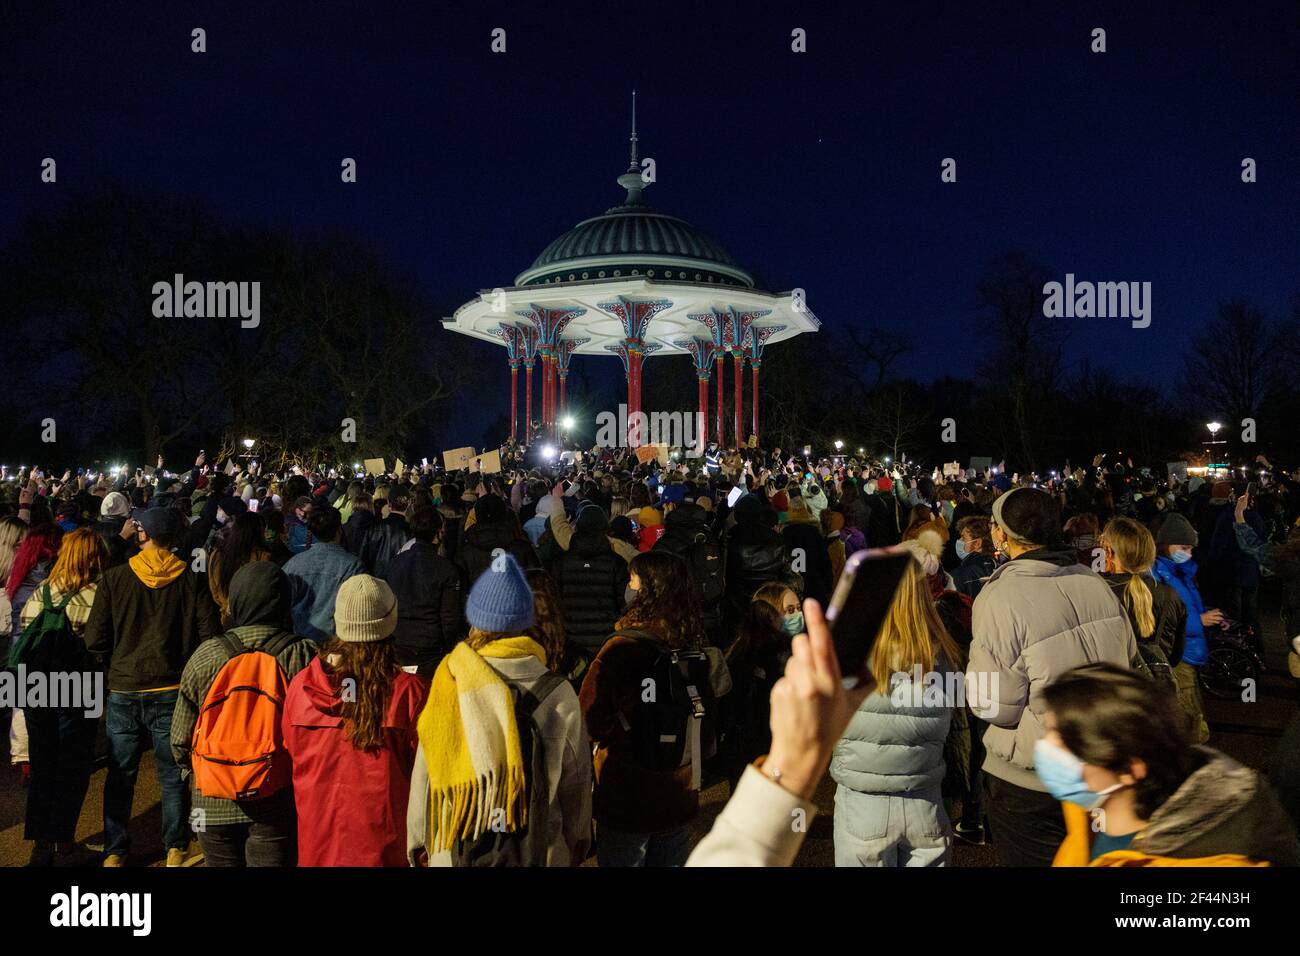 London, UK. 13th March, 2021. People attend a Vigil in memory of Sarah Everard at the Clapham Common bandstand, where floral tributes have been accumu Stock Photo